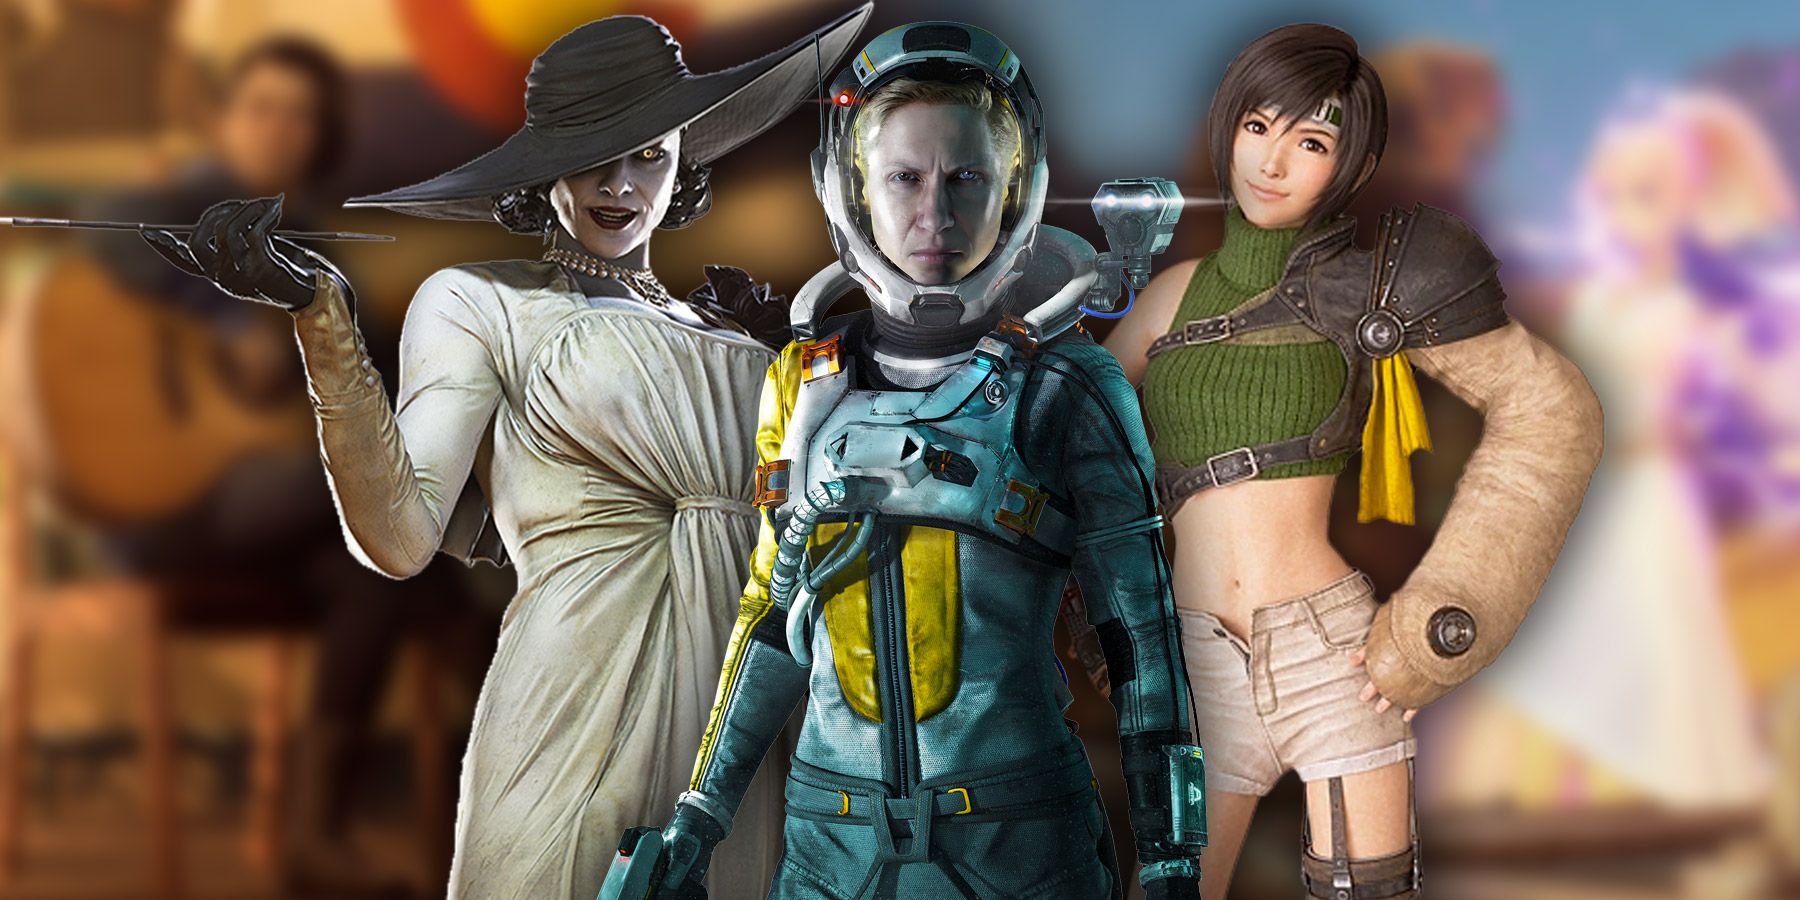 The Best Female Characters in Video Games Survey